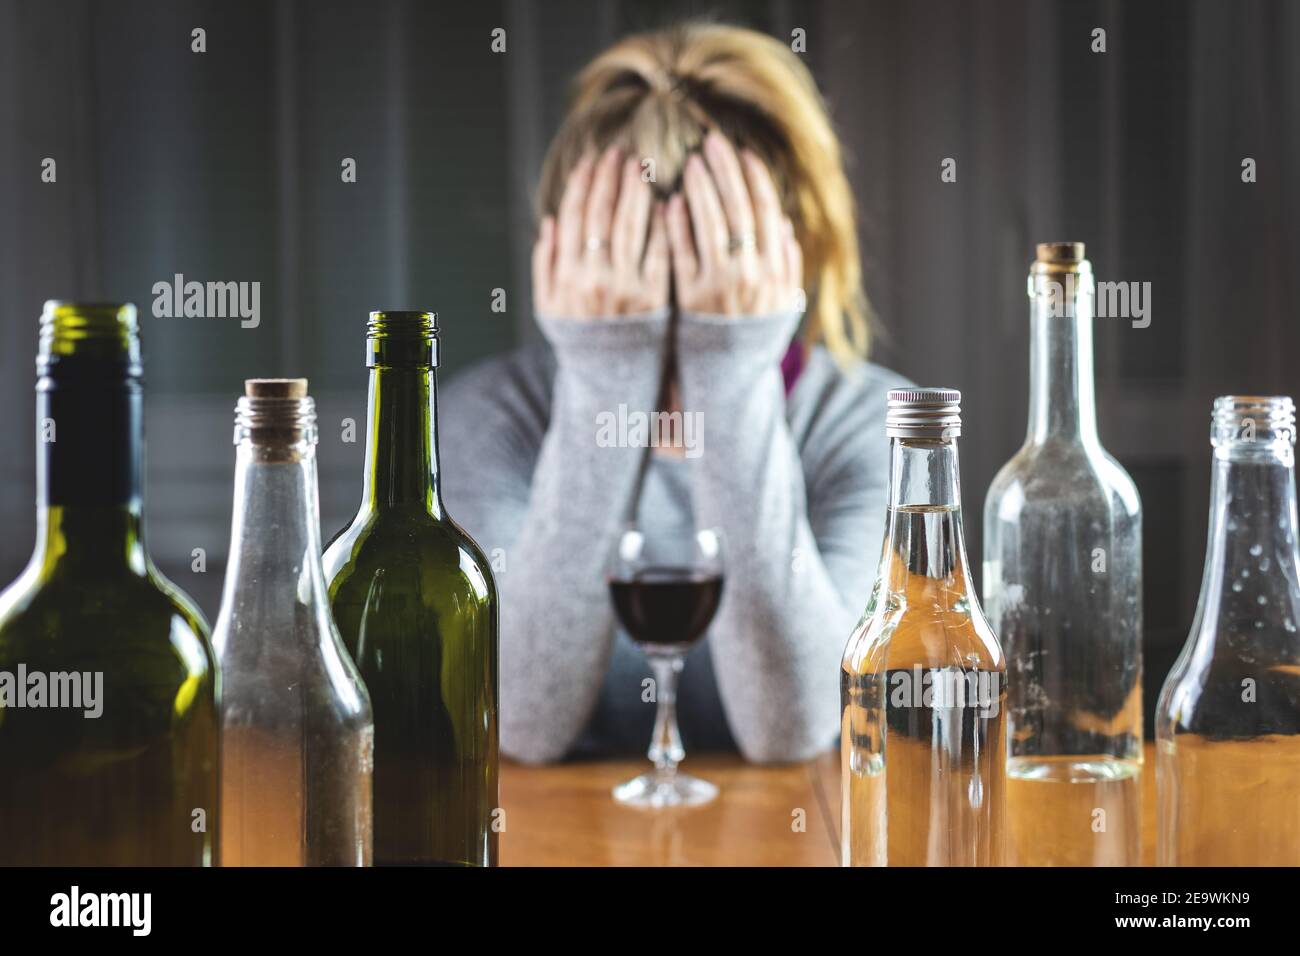 Alcoholism concept with woman and bottles indoors. Real people with alcohol abuse problem. Selective focus on bottles Stock Photo